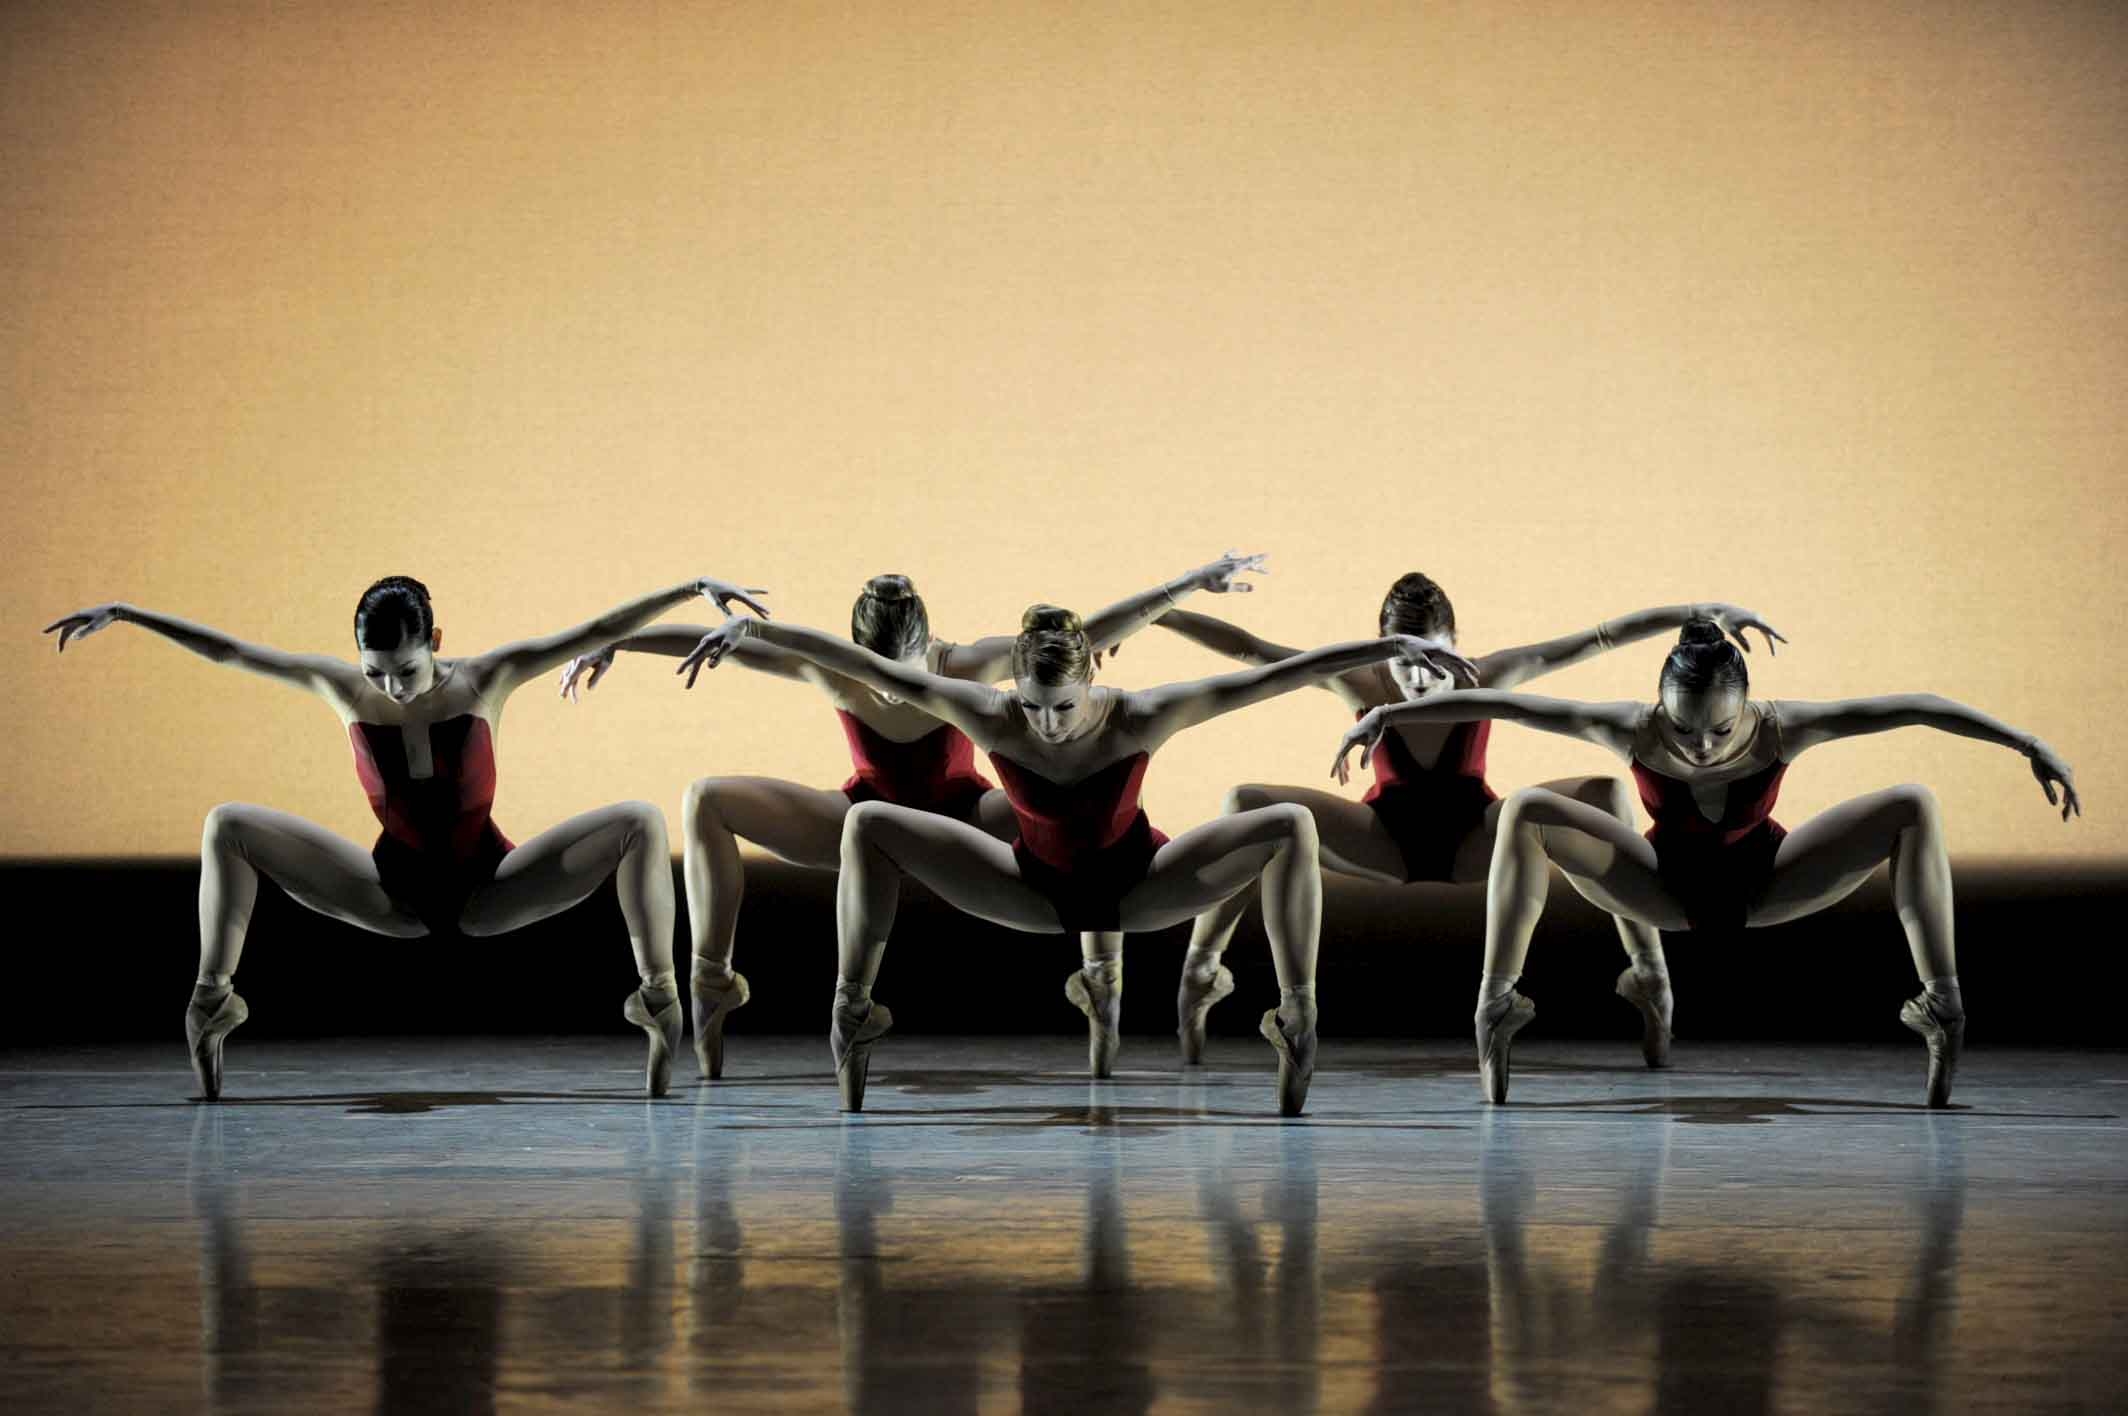 A cluster of five female dancers balance in deep second position pliés on pointe. Their arms extend to the sides like wings, heads bowed to look toward the floor. The backdrop is a faded orange, the stage lighting shadowy.